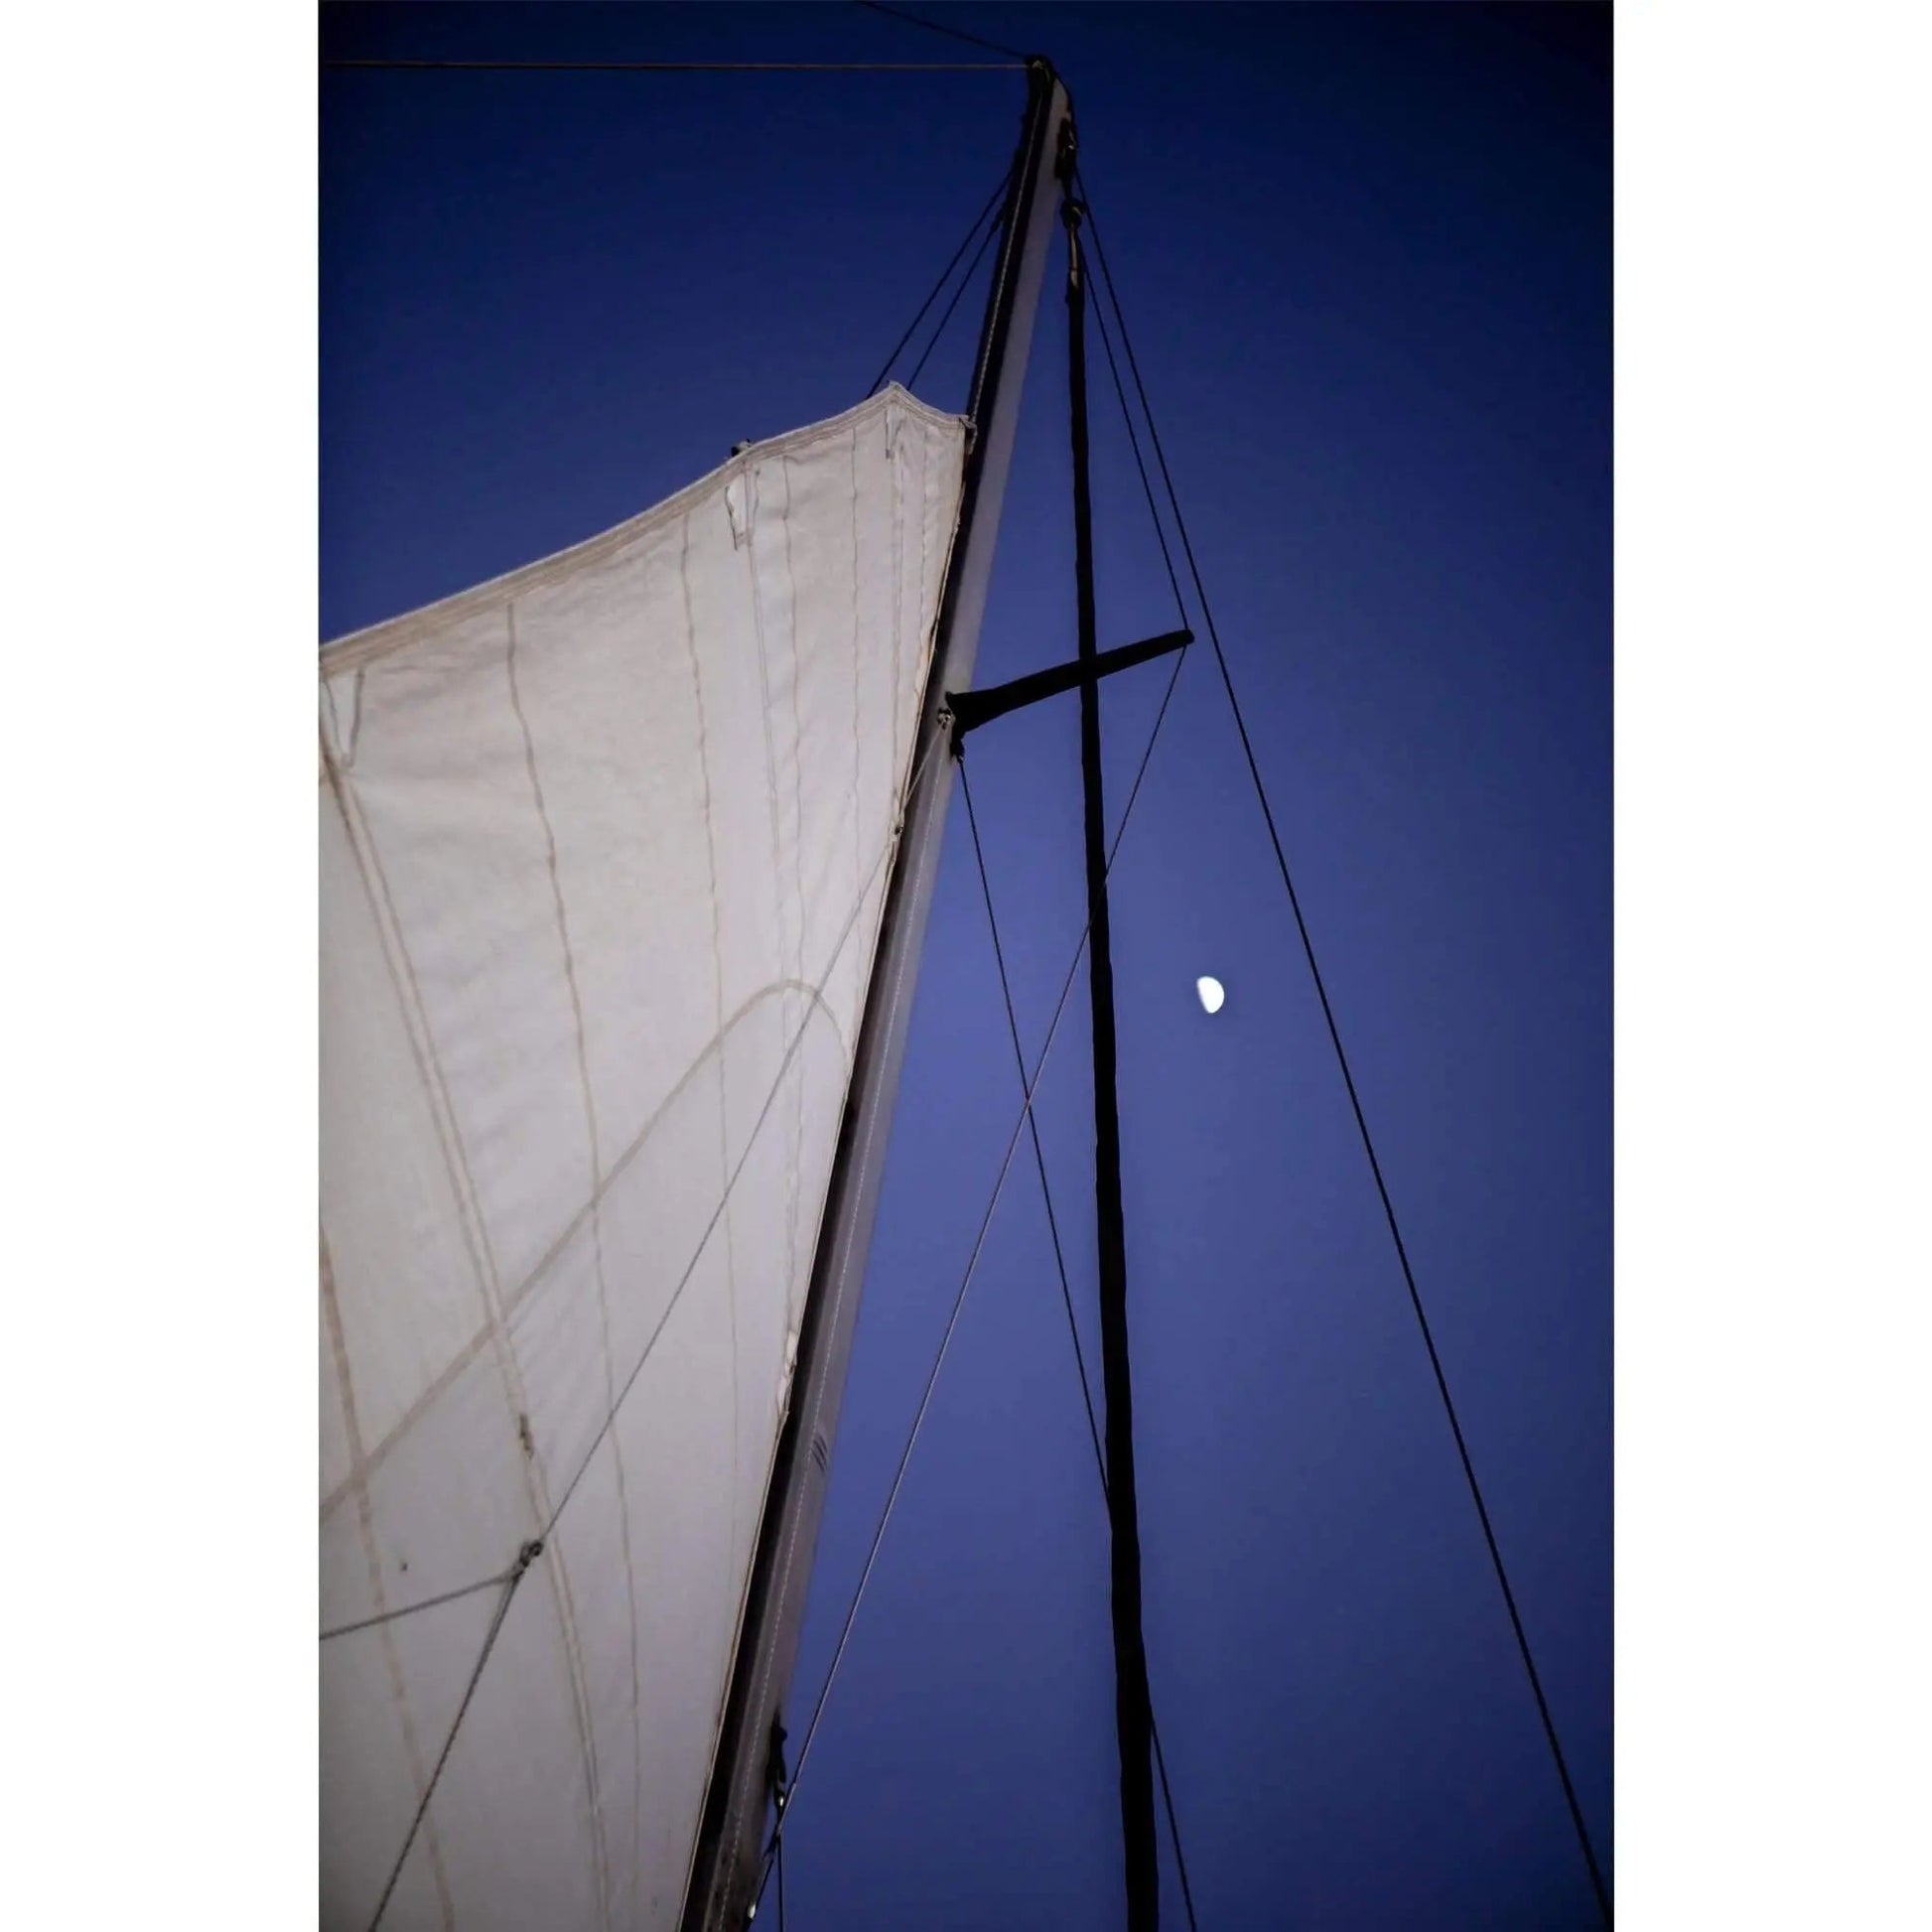 Night time sail mast surrounds moon light in dark blue